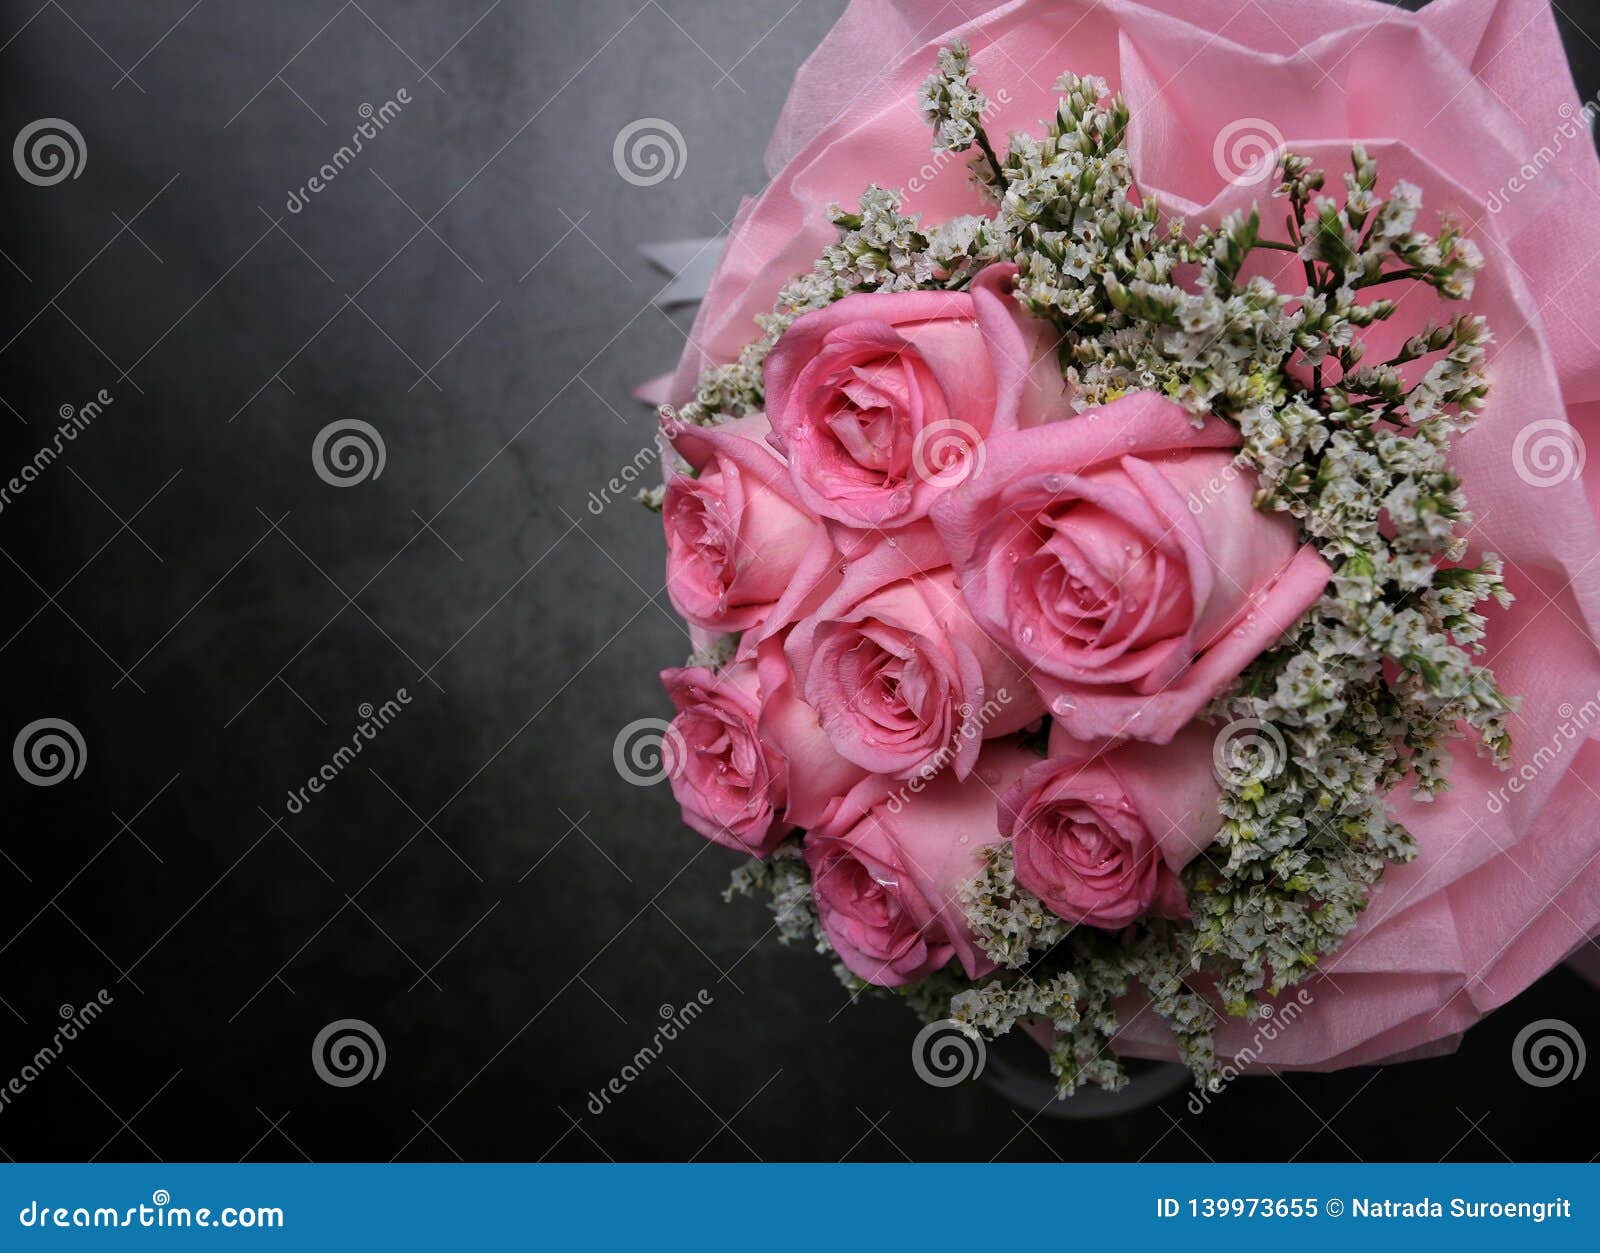 Pink And Black Rose Bouquet